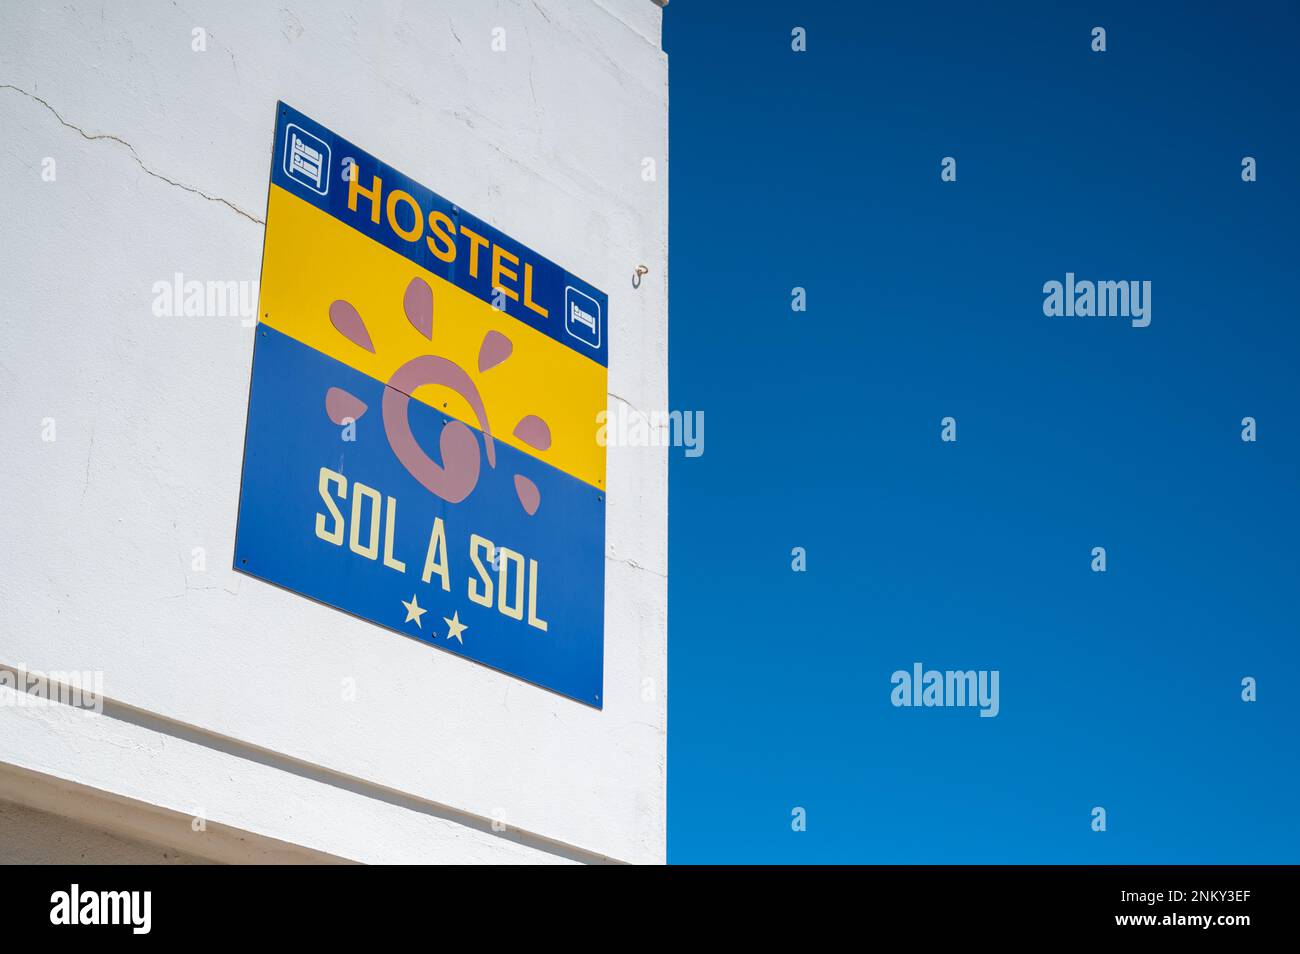 A sign for the Hostel Sol A Sol in Lagos, Algarve, Portugal, Stock Photo